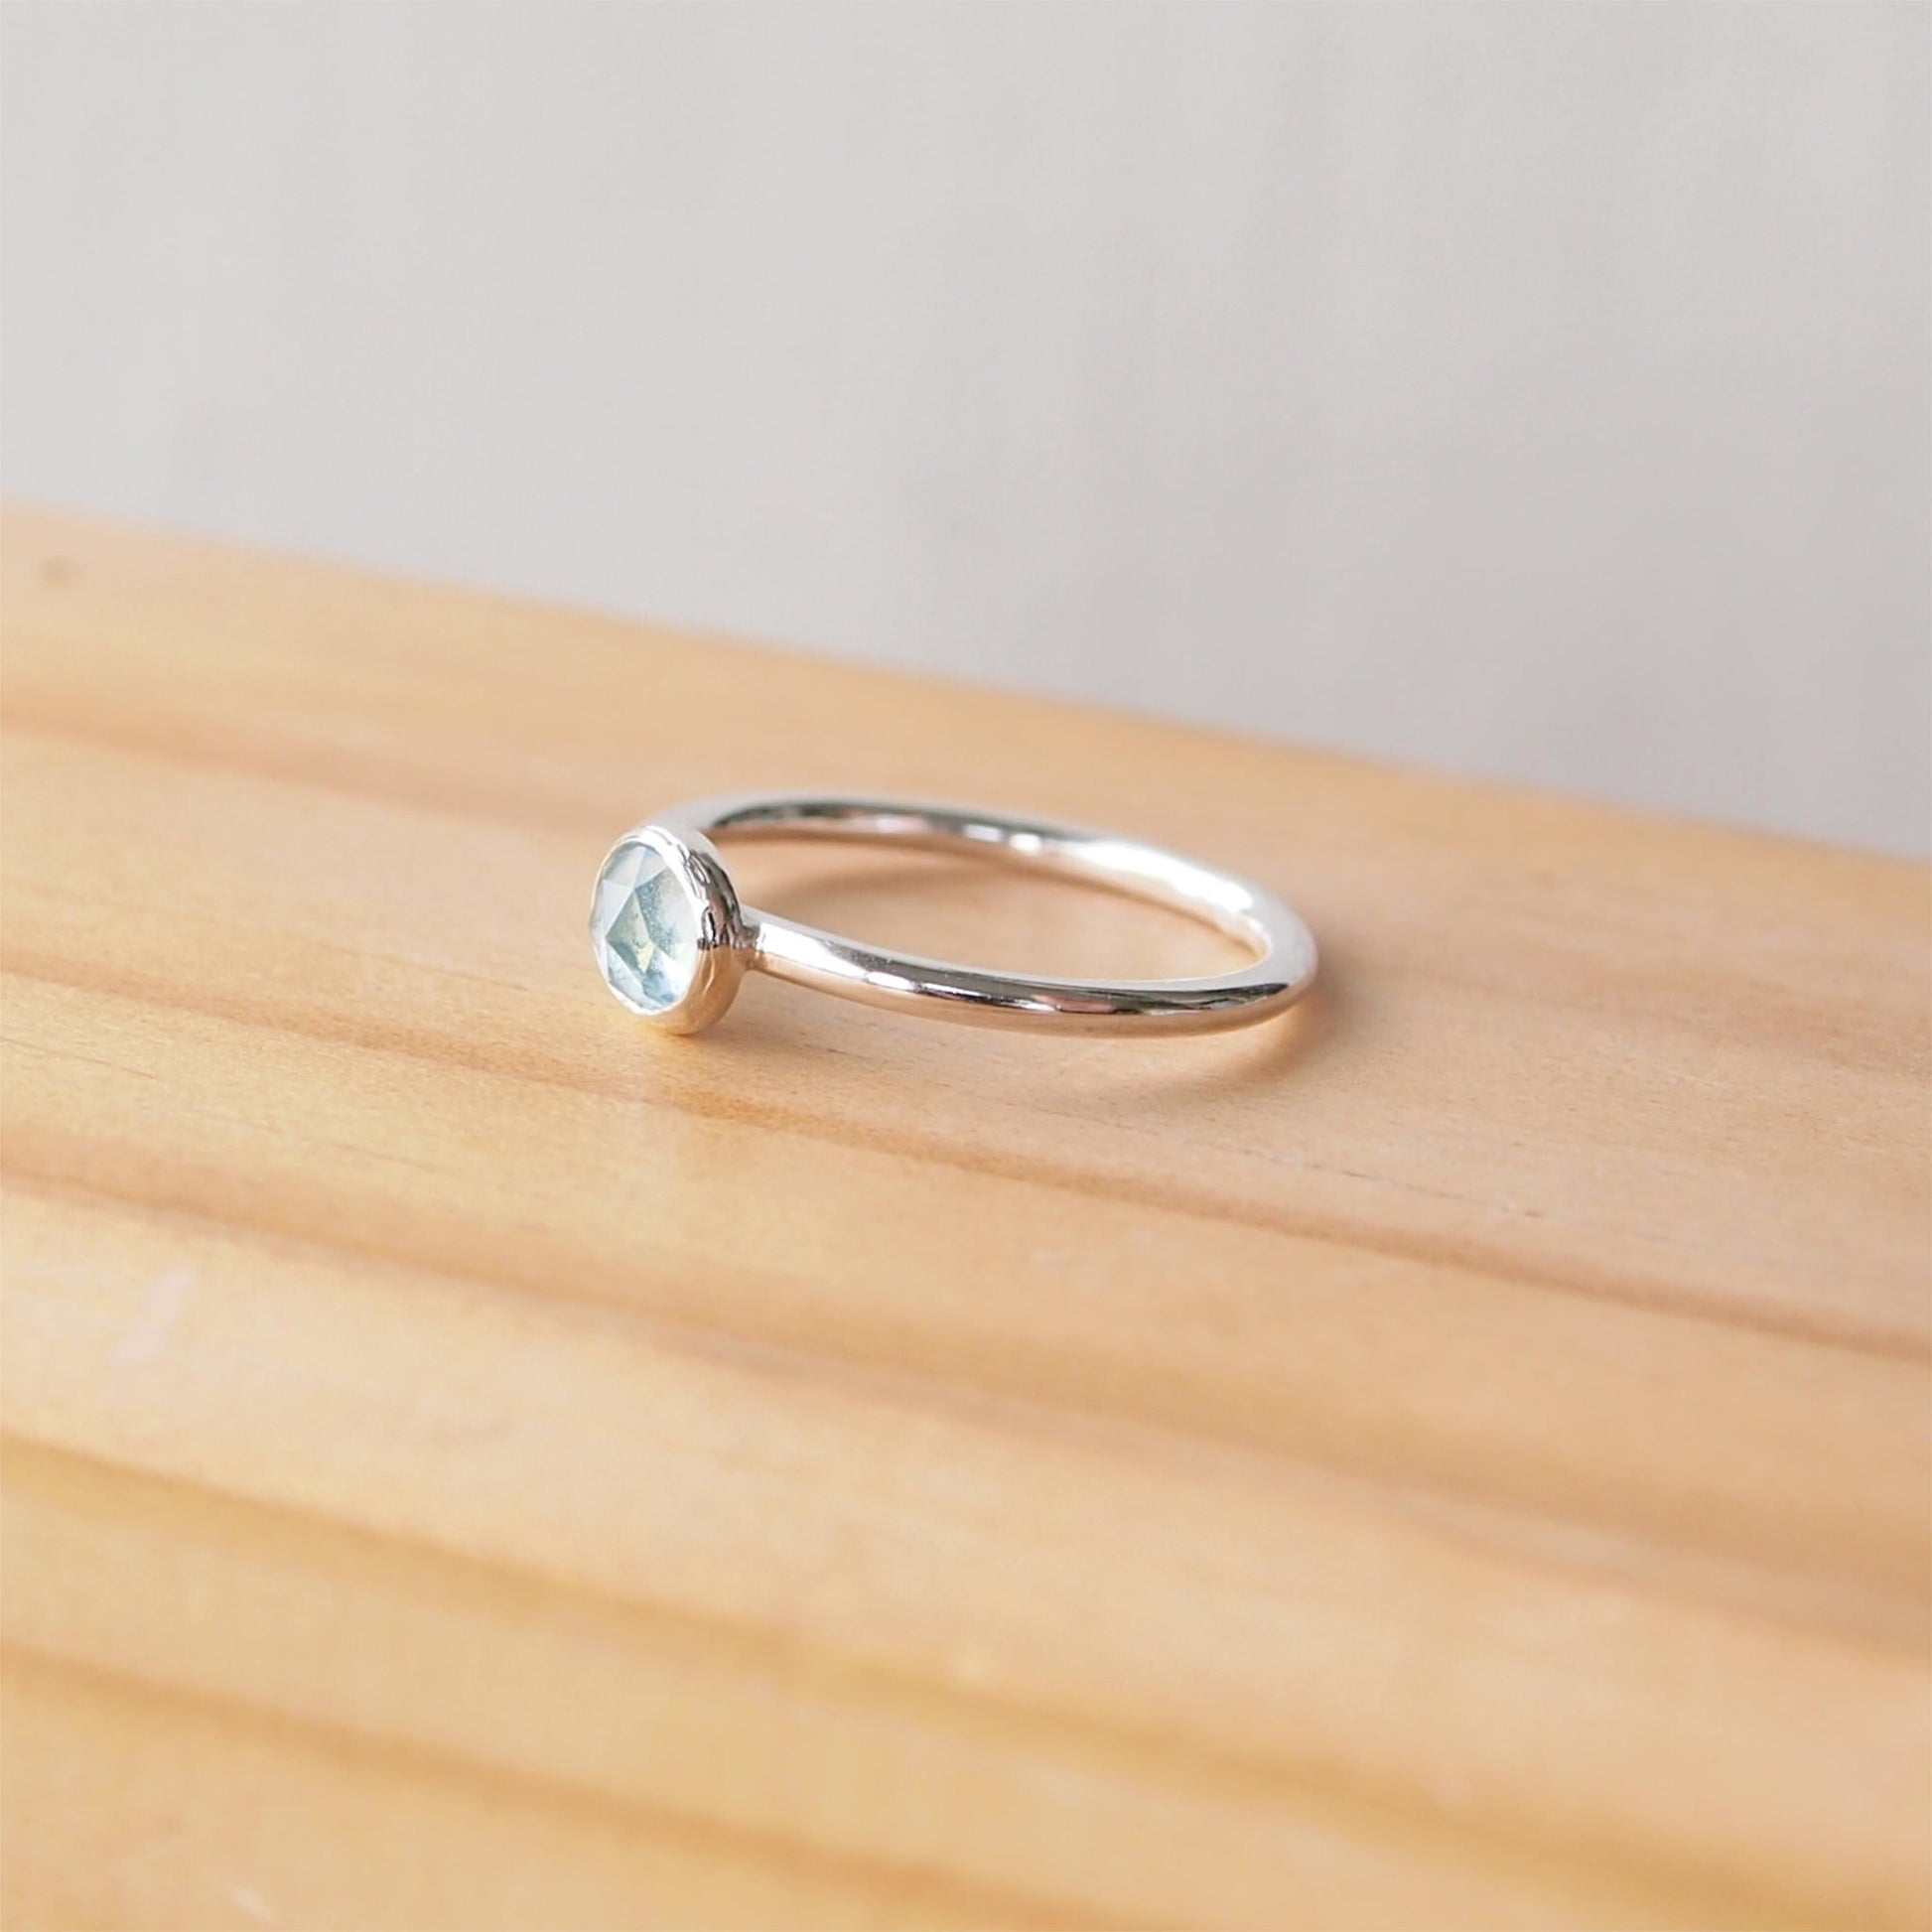 Simple Silver and aquamarine ring with a 5mm round light aqua facet cut cabochon set simply on a round band. Birthstone for March. Handmade by Maram Jewellery in Scotland